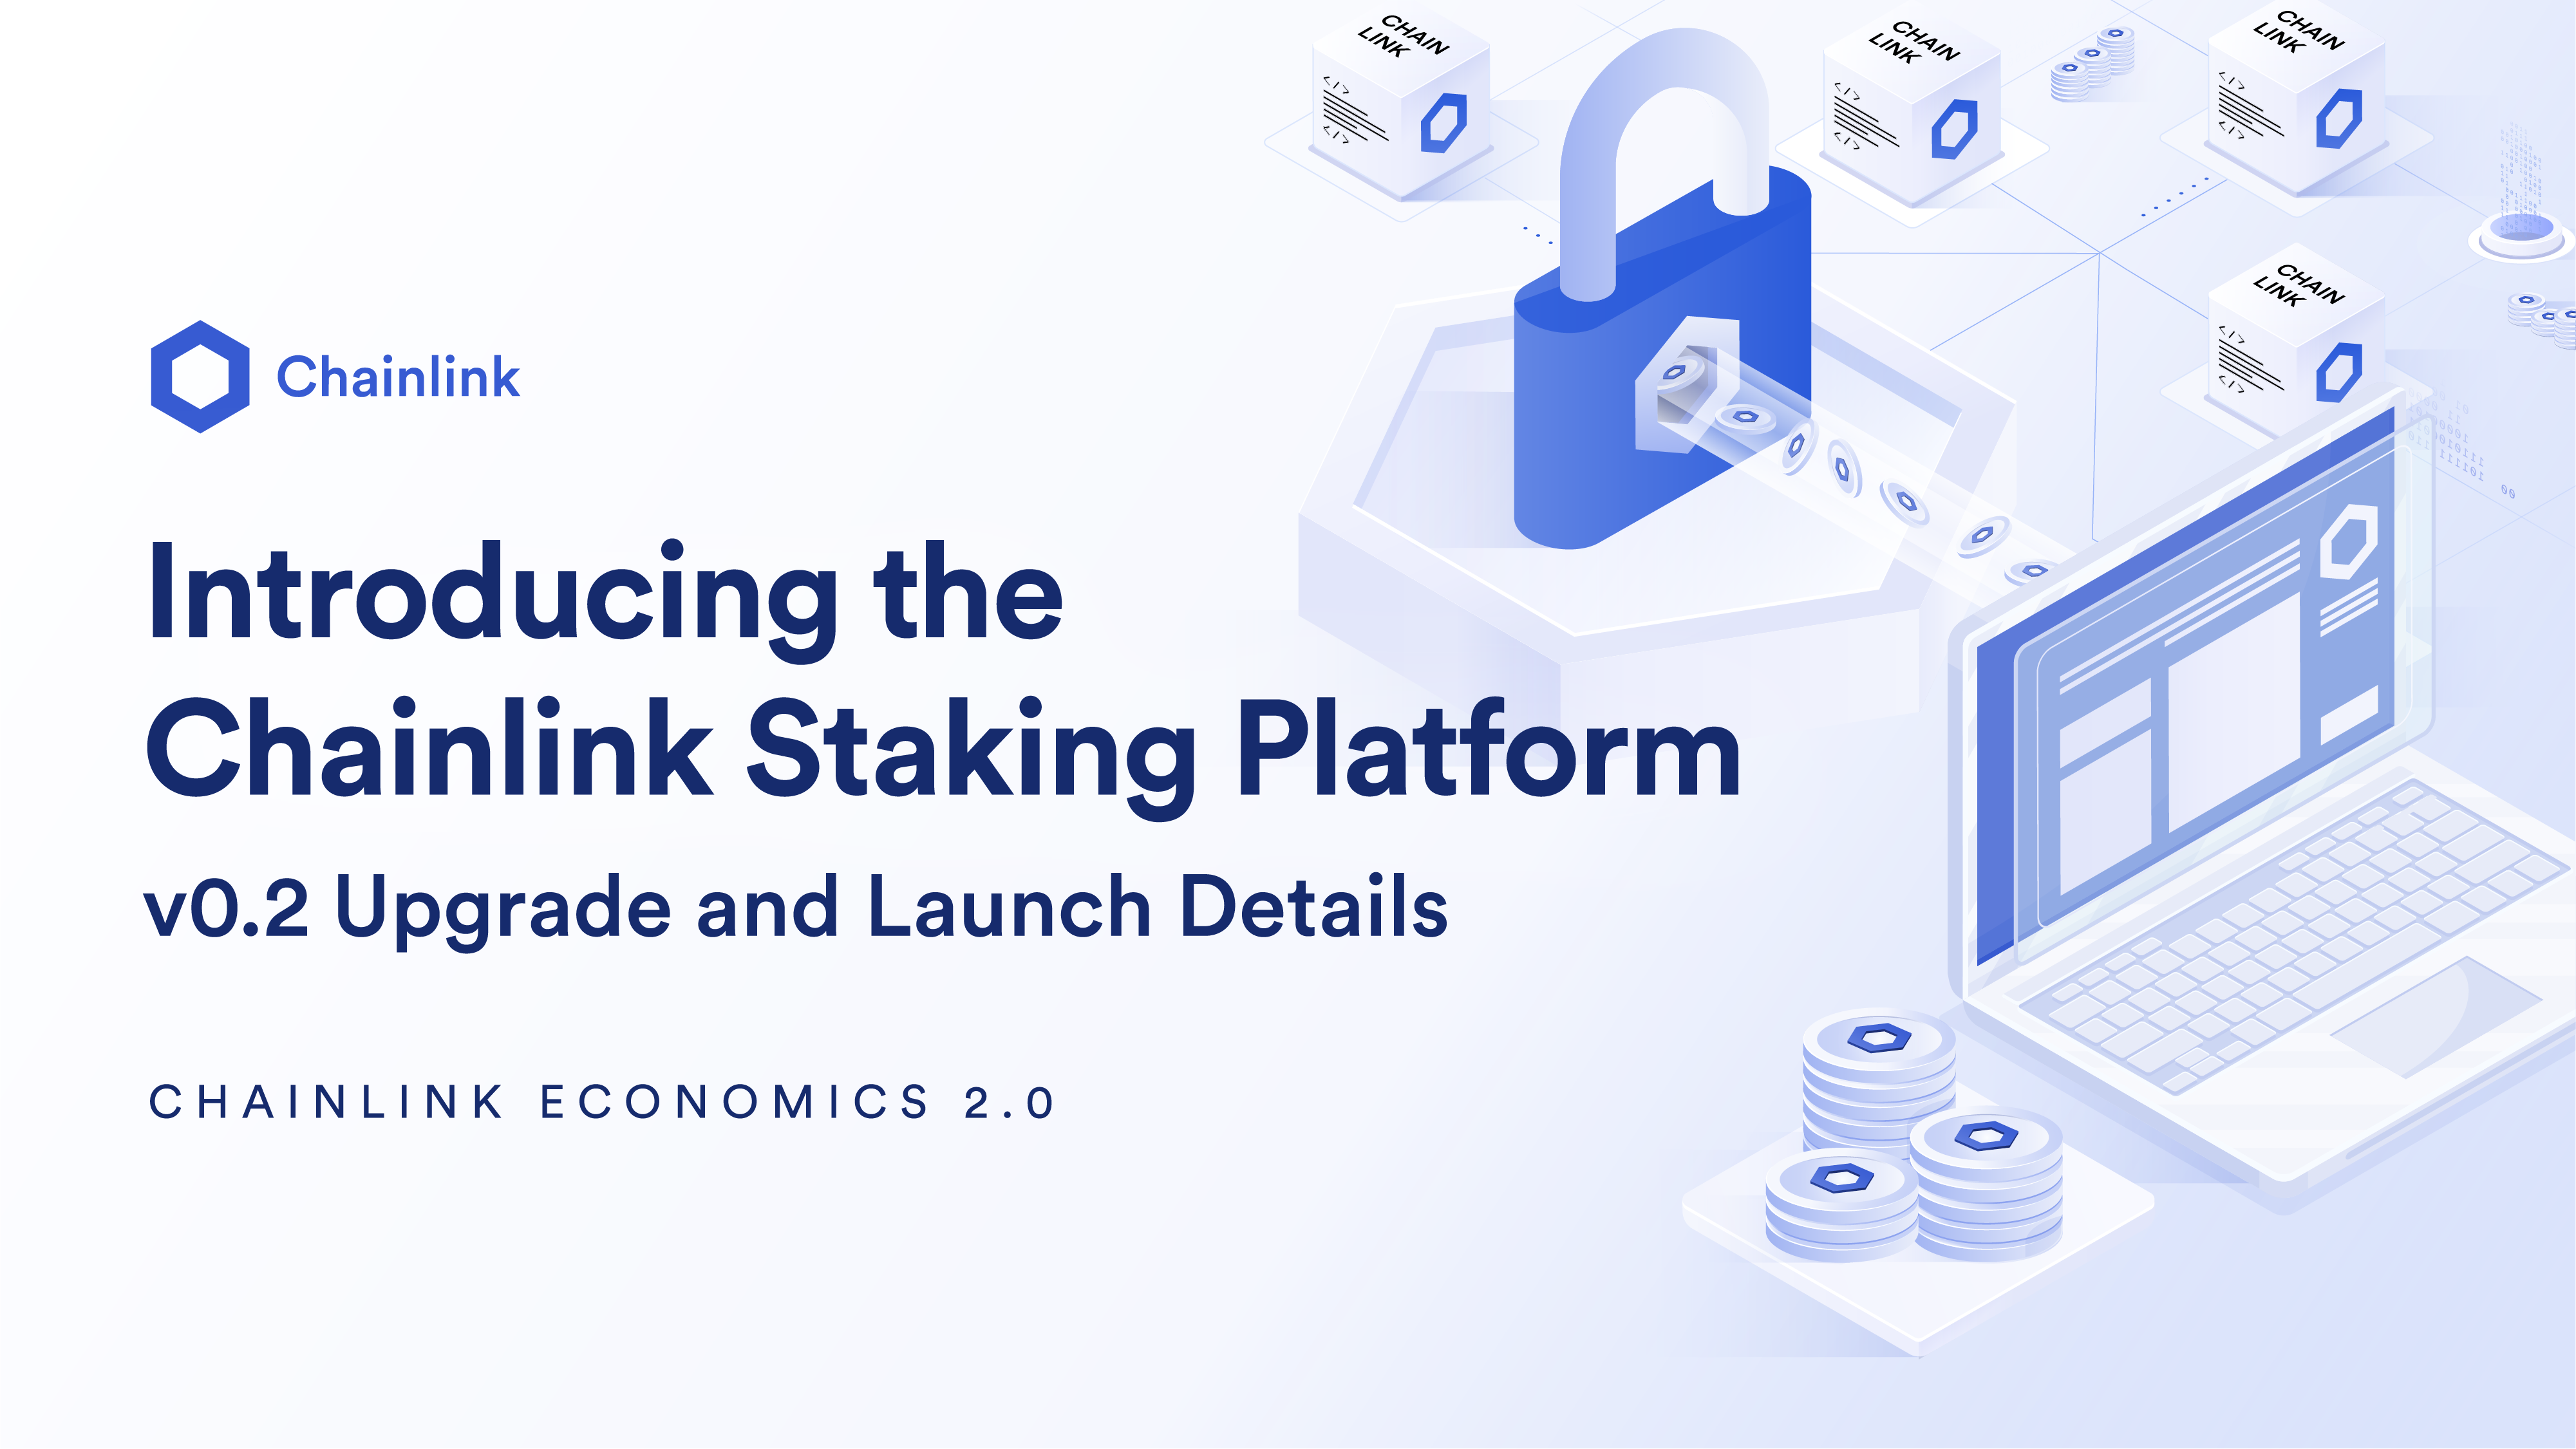 Staking Crypto and Earn Coins | Ledger